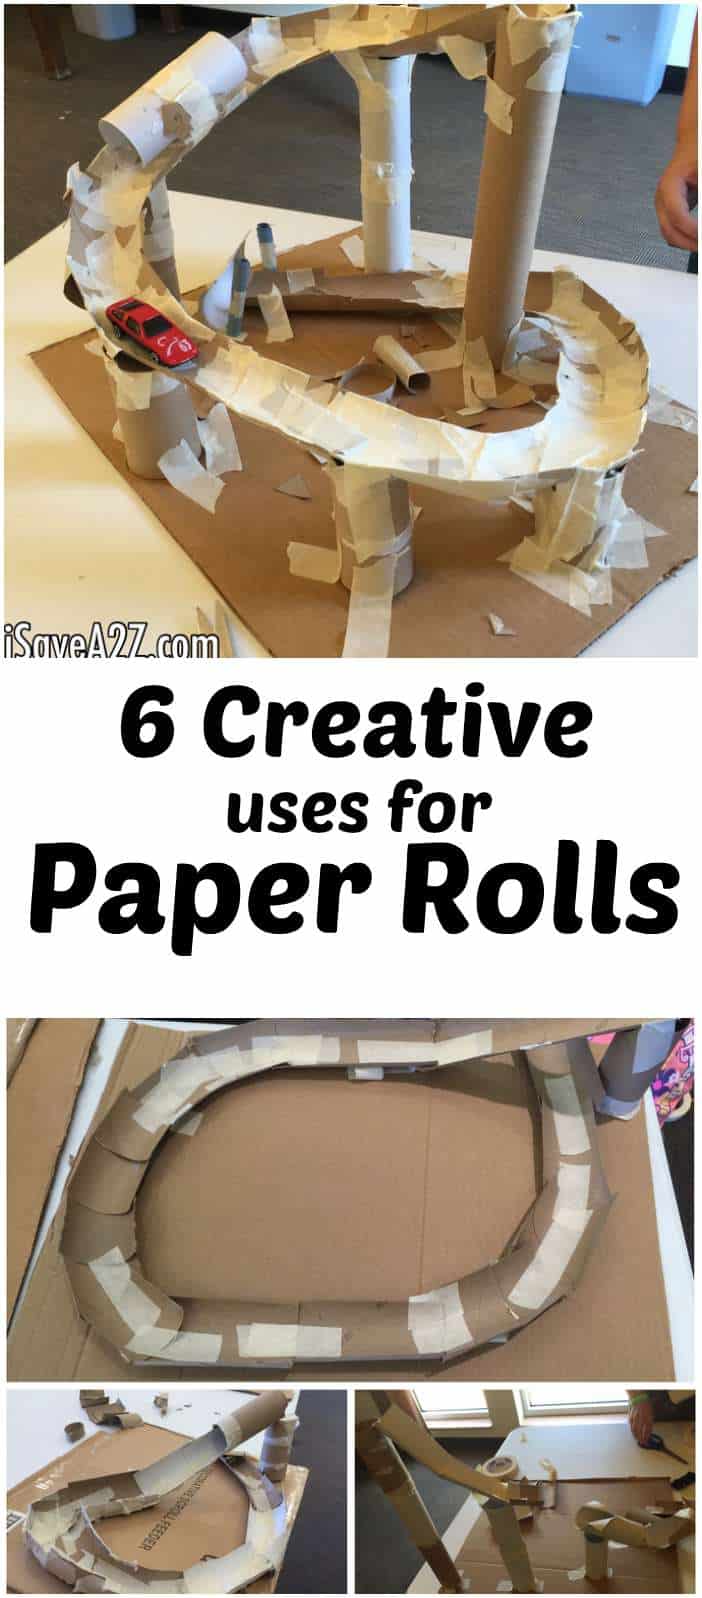 Creative uses for toilet paper rolls